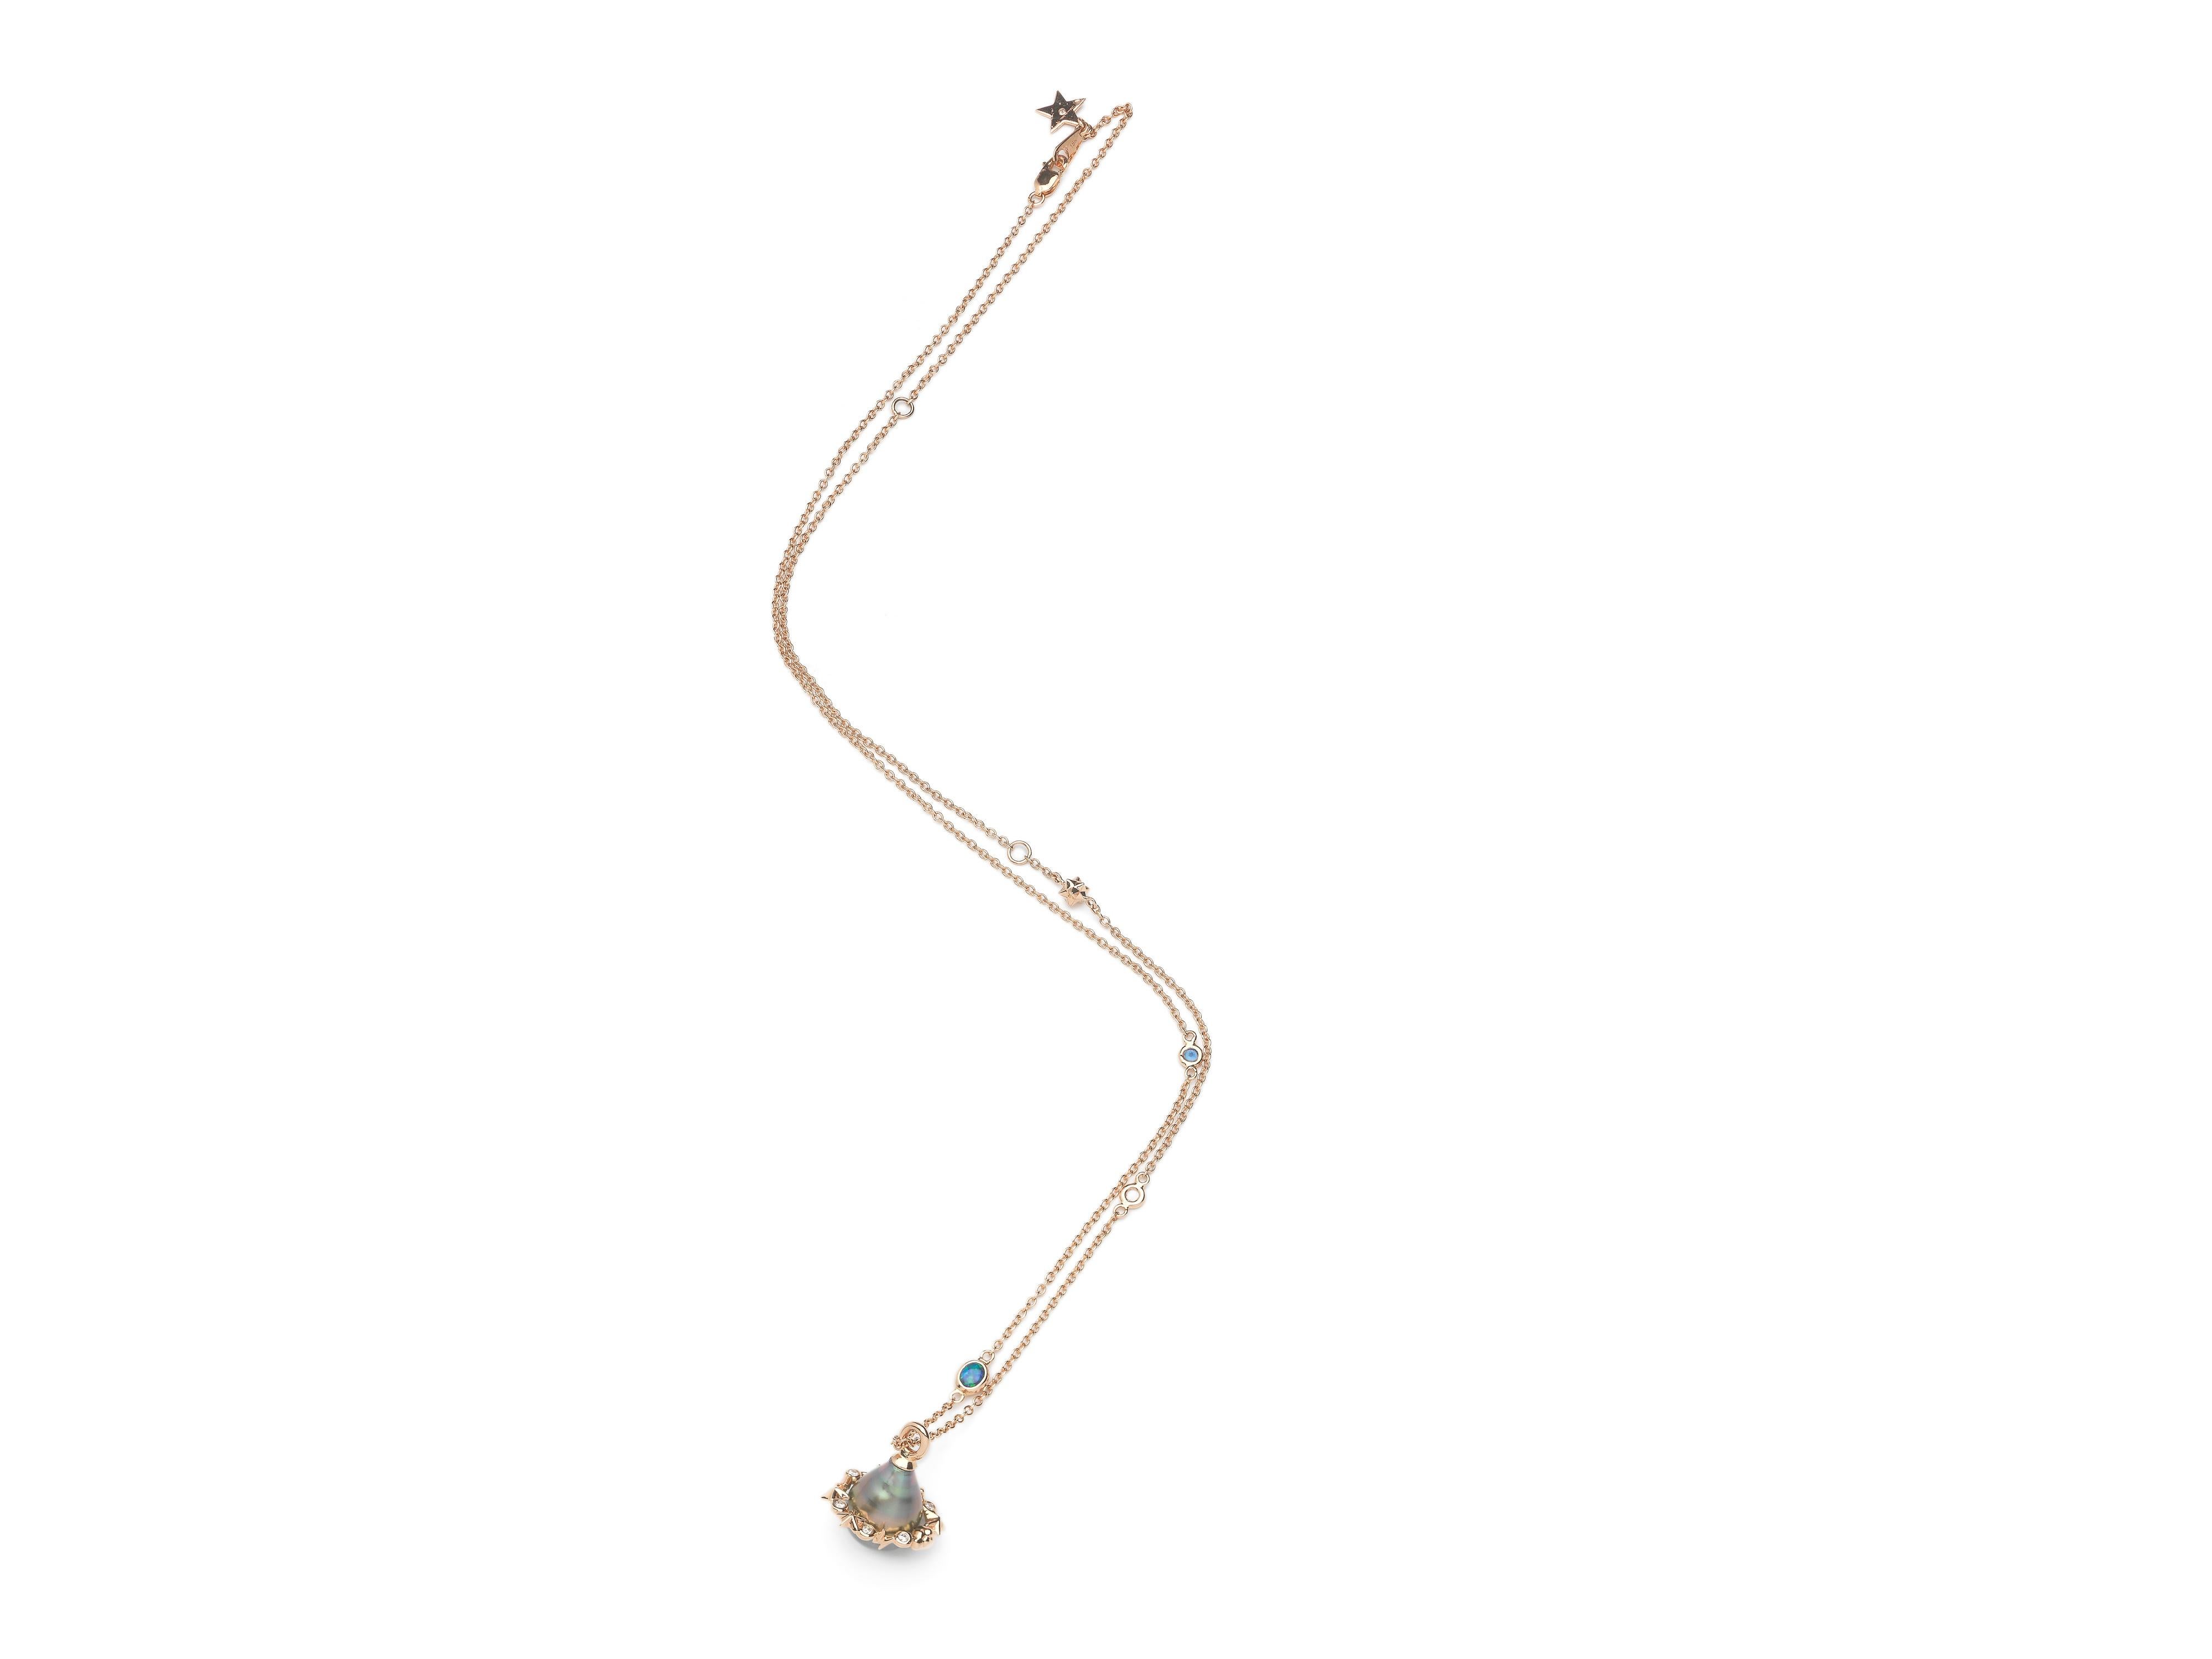 A beautiful petrol-blue, Tahitian pearl is the star of this necklace, with the pearl orbited by an 18k rose gold ring, that sparkles with white diamonds to resemble stars. The 18k rose gold chain is also set with white diamonds and blue sapphires